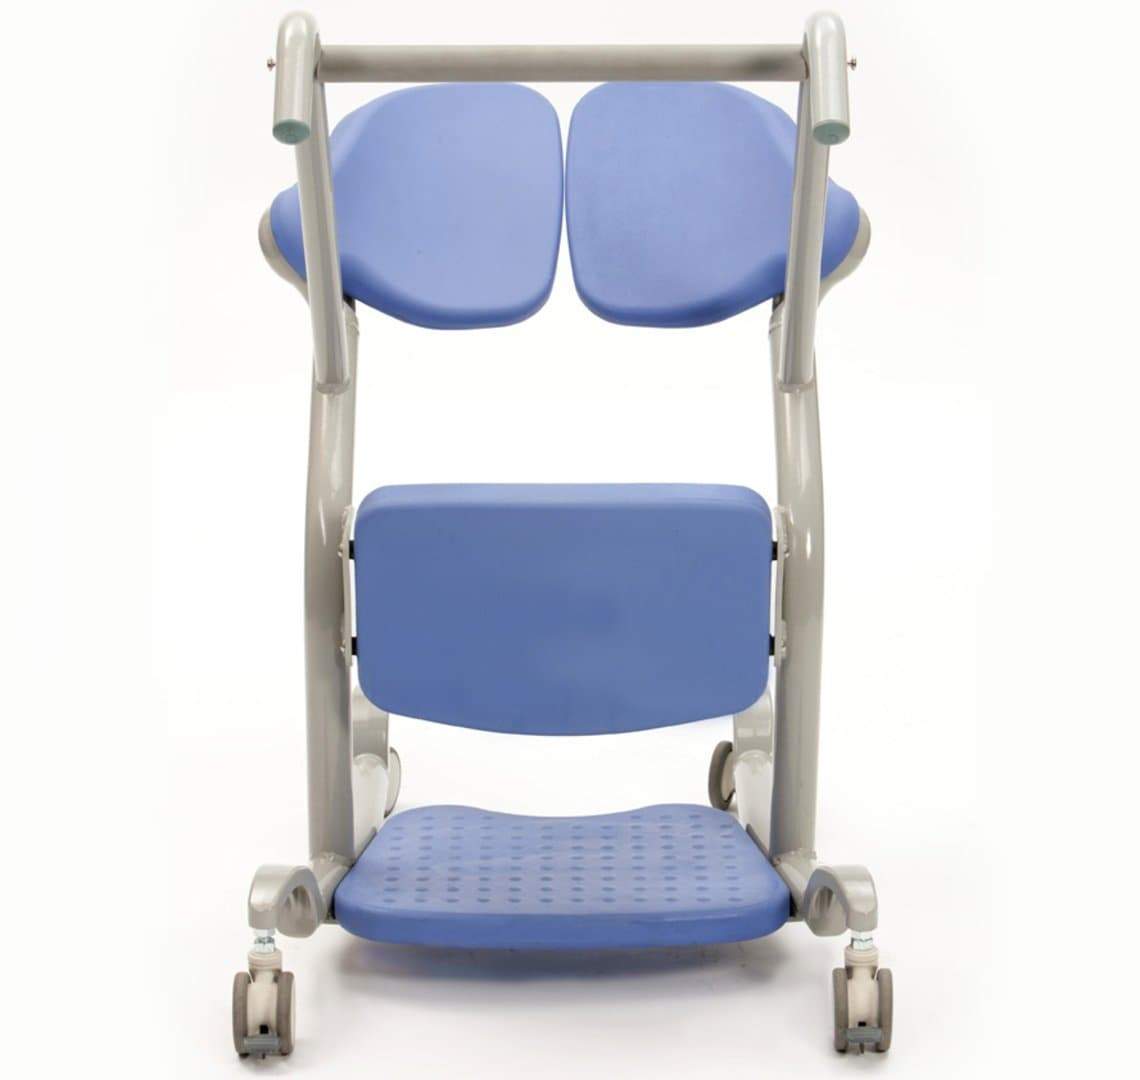 Able Assist Patient Transfer Aid with Adjustable Legs PT004AU by Drive